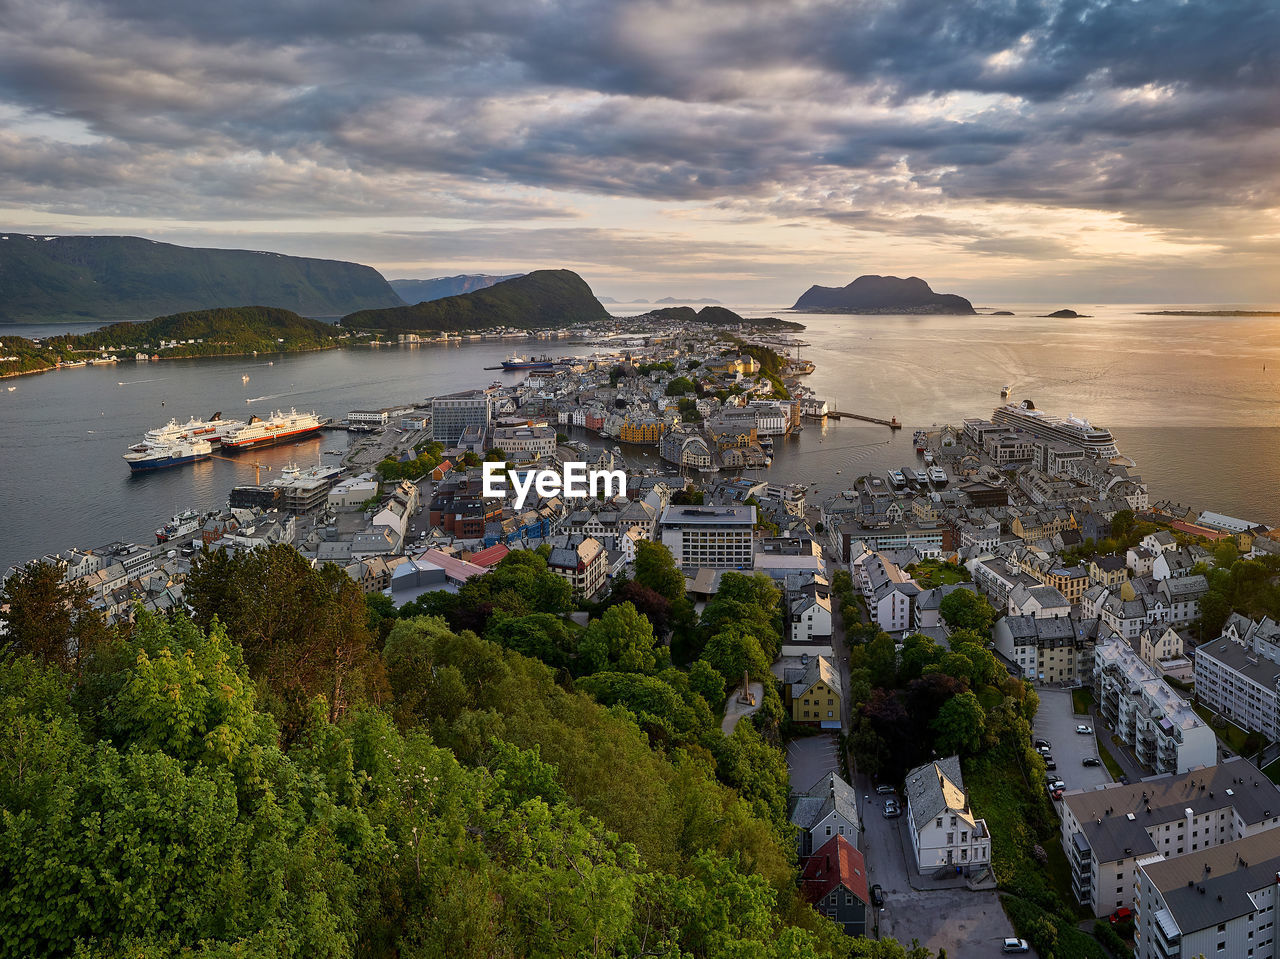 View of Ålesund in spring from aksla mountain viewpoint, norway